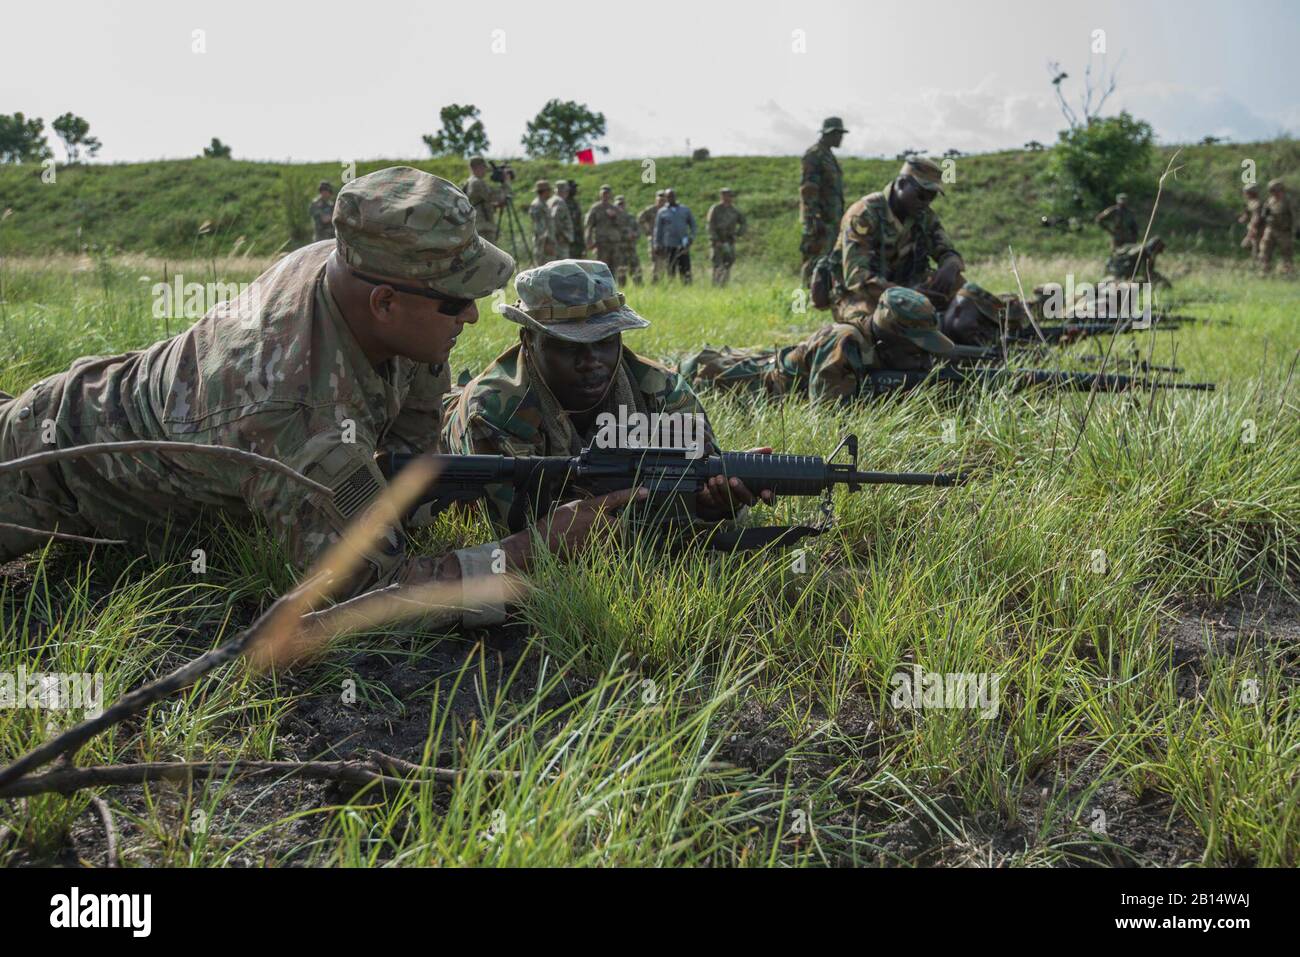 Ghana Armed Forces and U.S. Soldiers practice basic rifle marksmanship skills at the field training exercise during United Accord 2017 at the Bundase Training Center in Accra, Ghana, May 23 2017. United Accord (formerly Western Accord) 2017 is an annual, combined, joint military exercise that promotes regional relationships, increases capacity, trains U.S. and Western African forces, and further cross training and interoperability. (U.S. Army photo by Staff Sgt. Shejal Pulivarti) Stock Photo